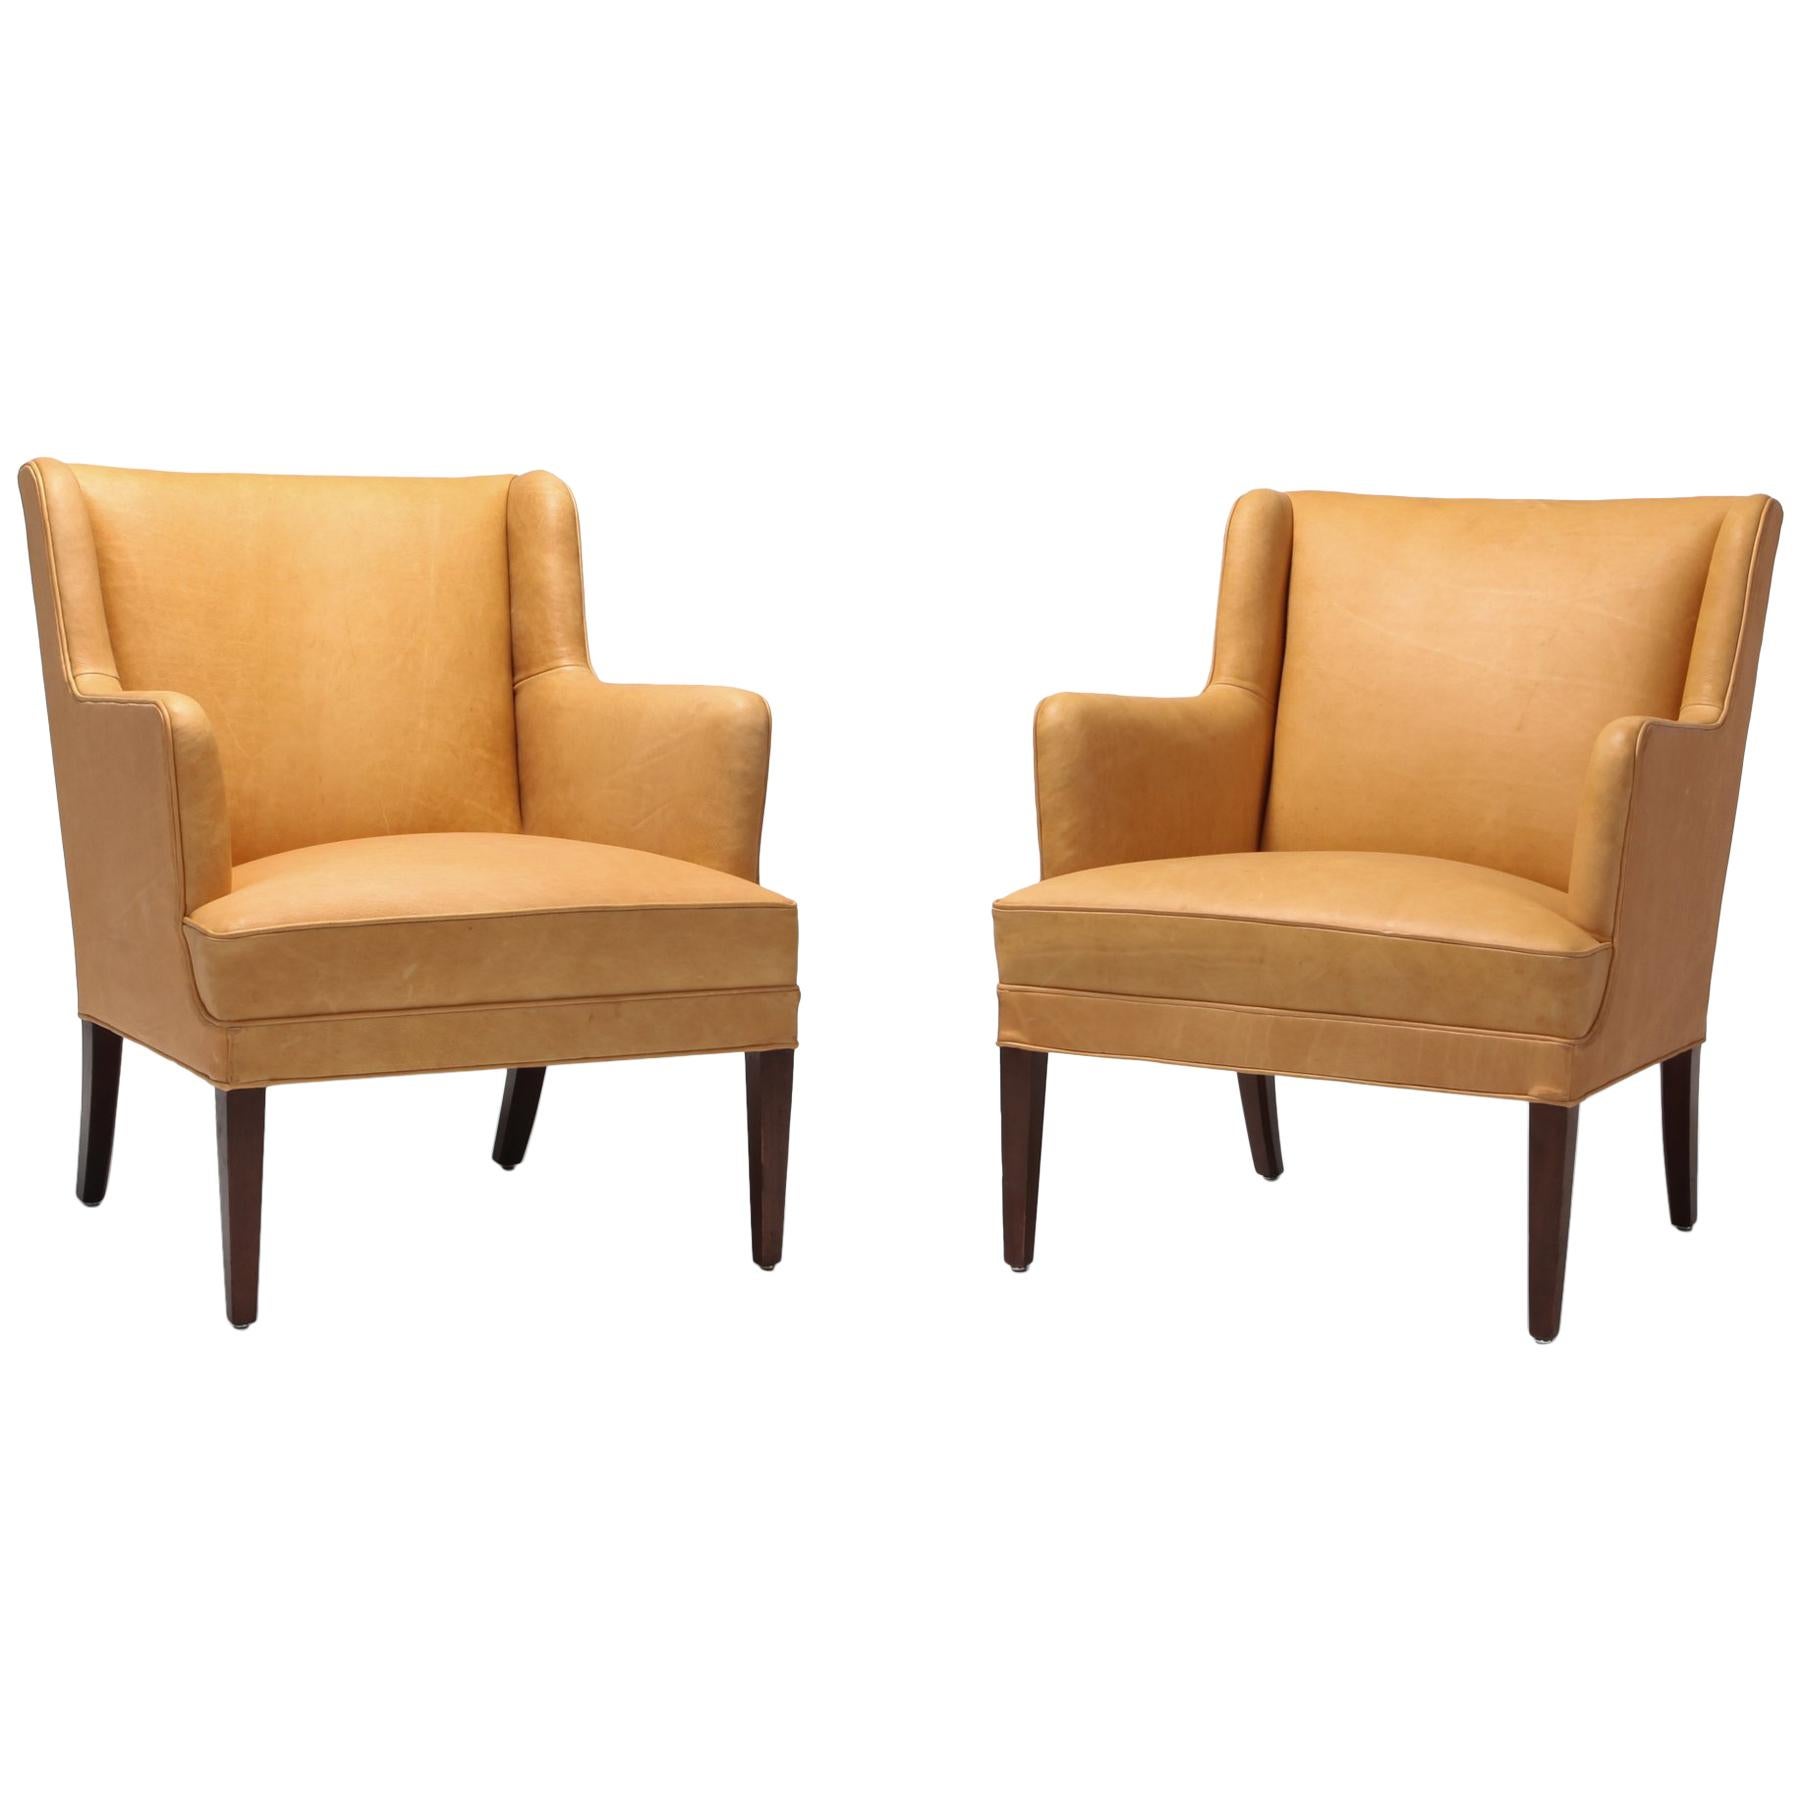 Scandinavian Modern Bergere Chairs in Camel Leather